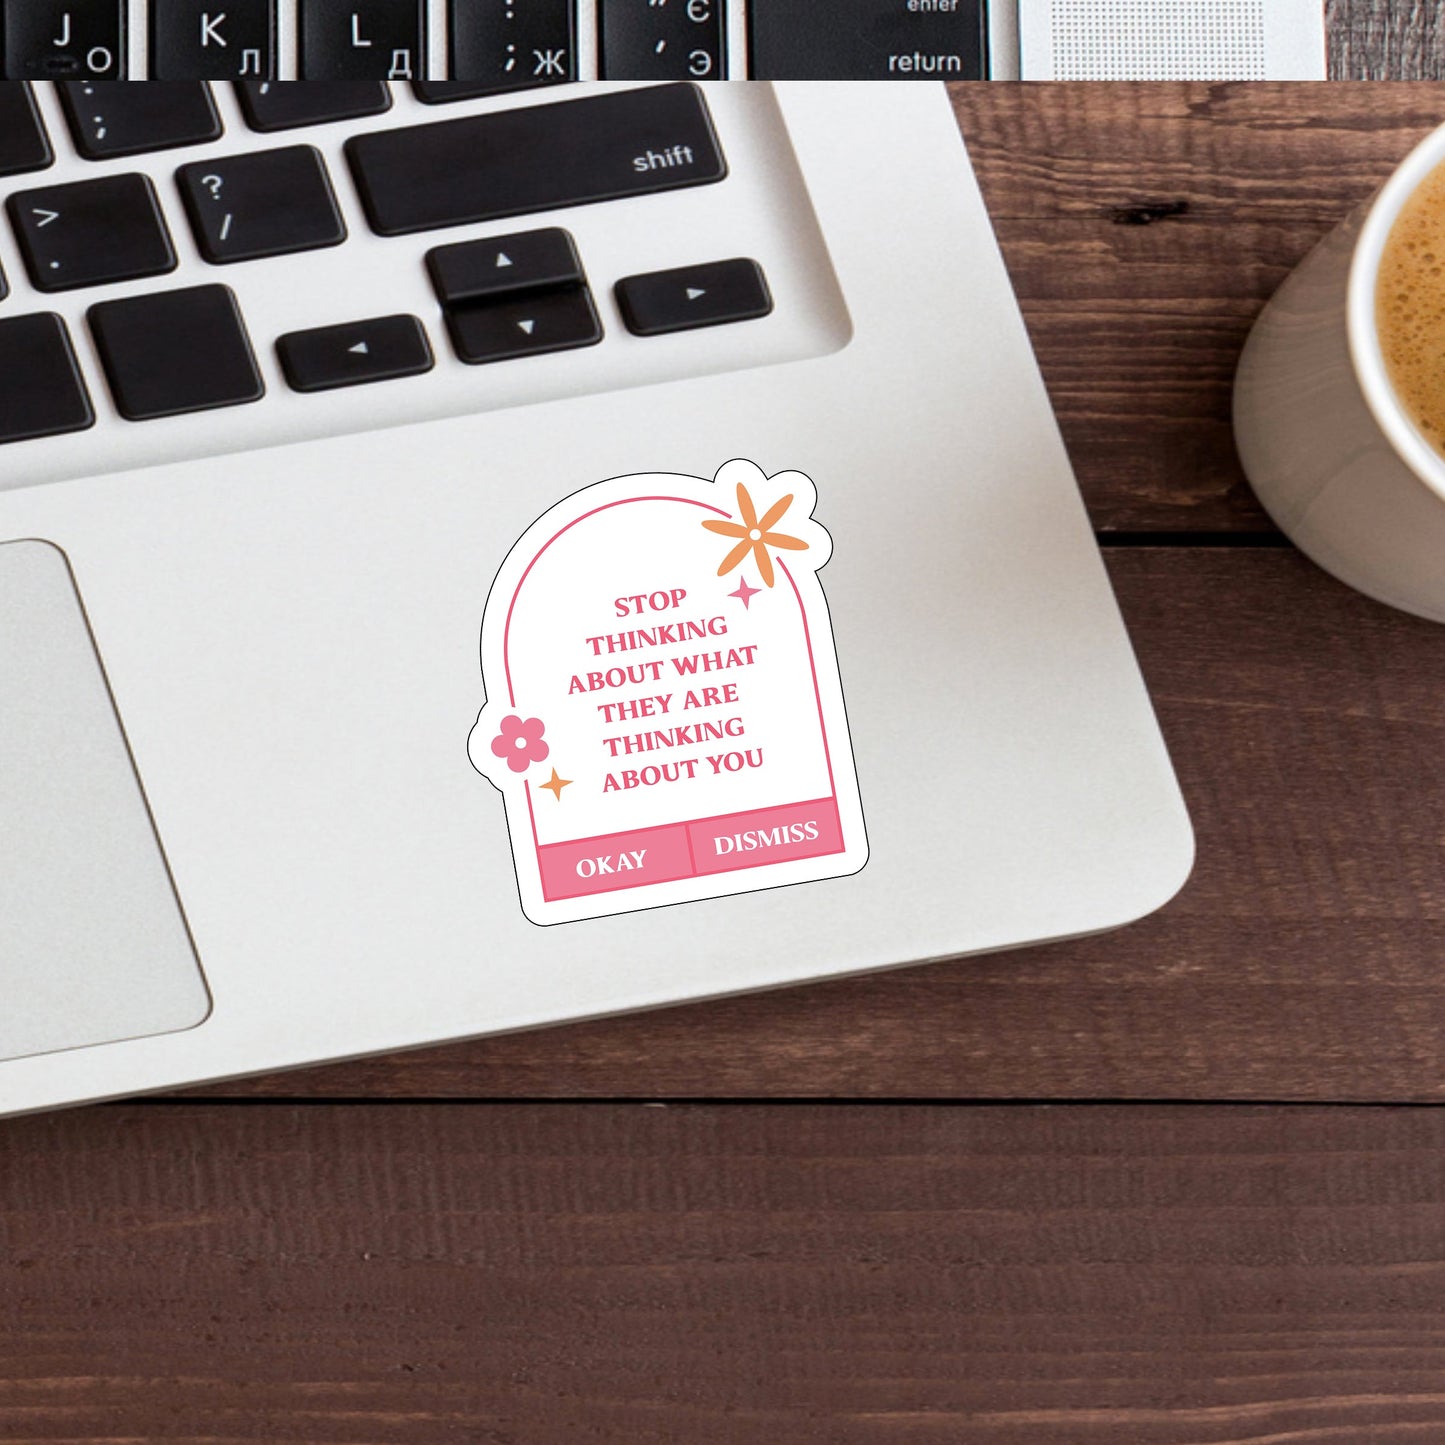 Stop thinking about what they are thinking about you  Sticker,  Vinyl sticker, laptop sticker, Tablet sticker